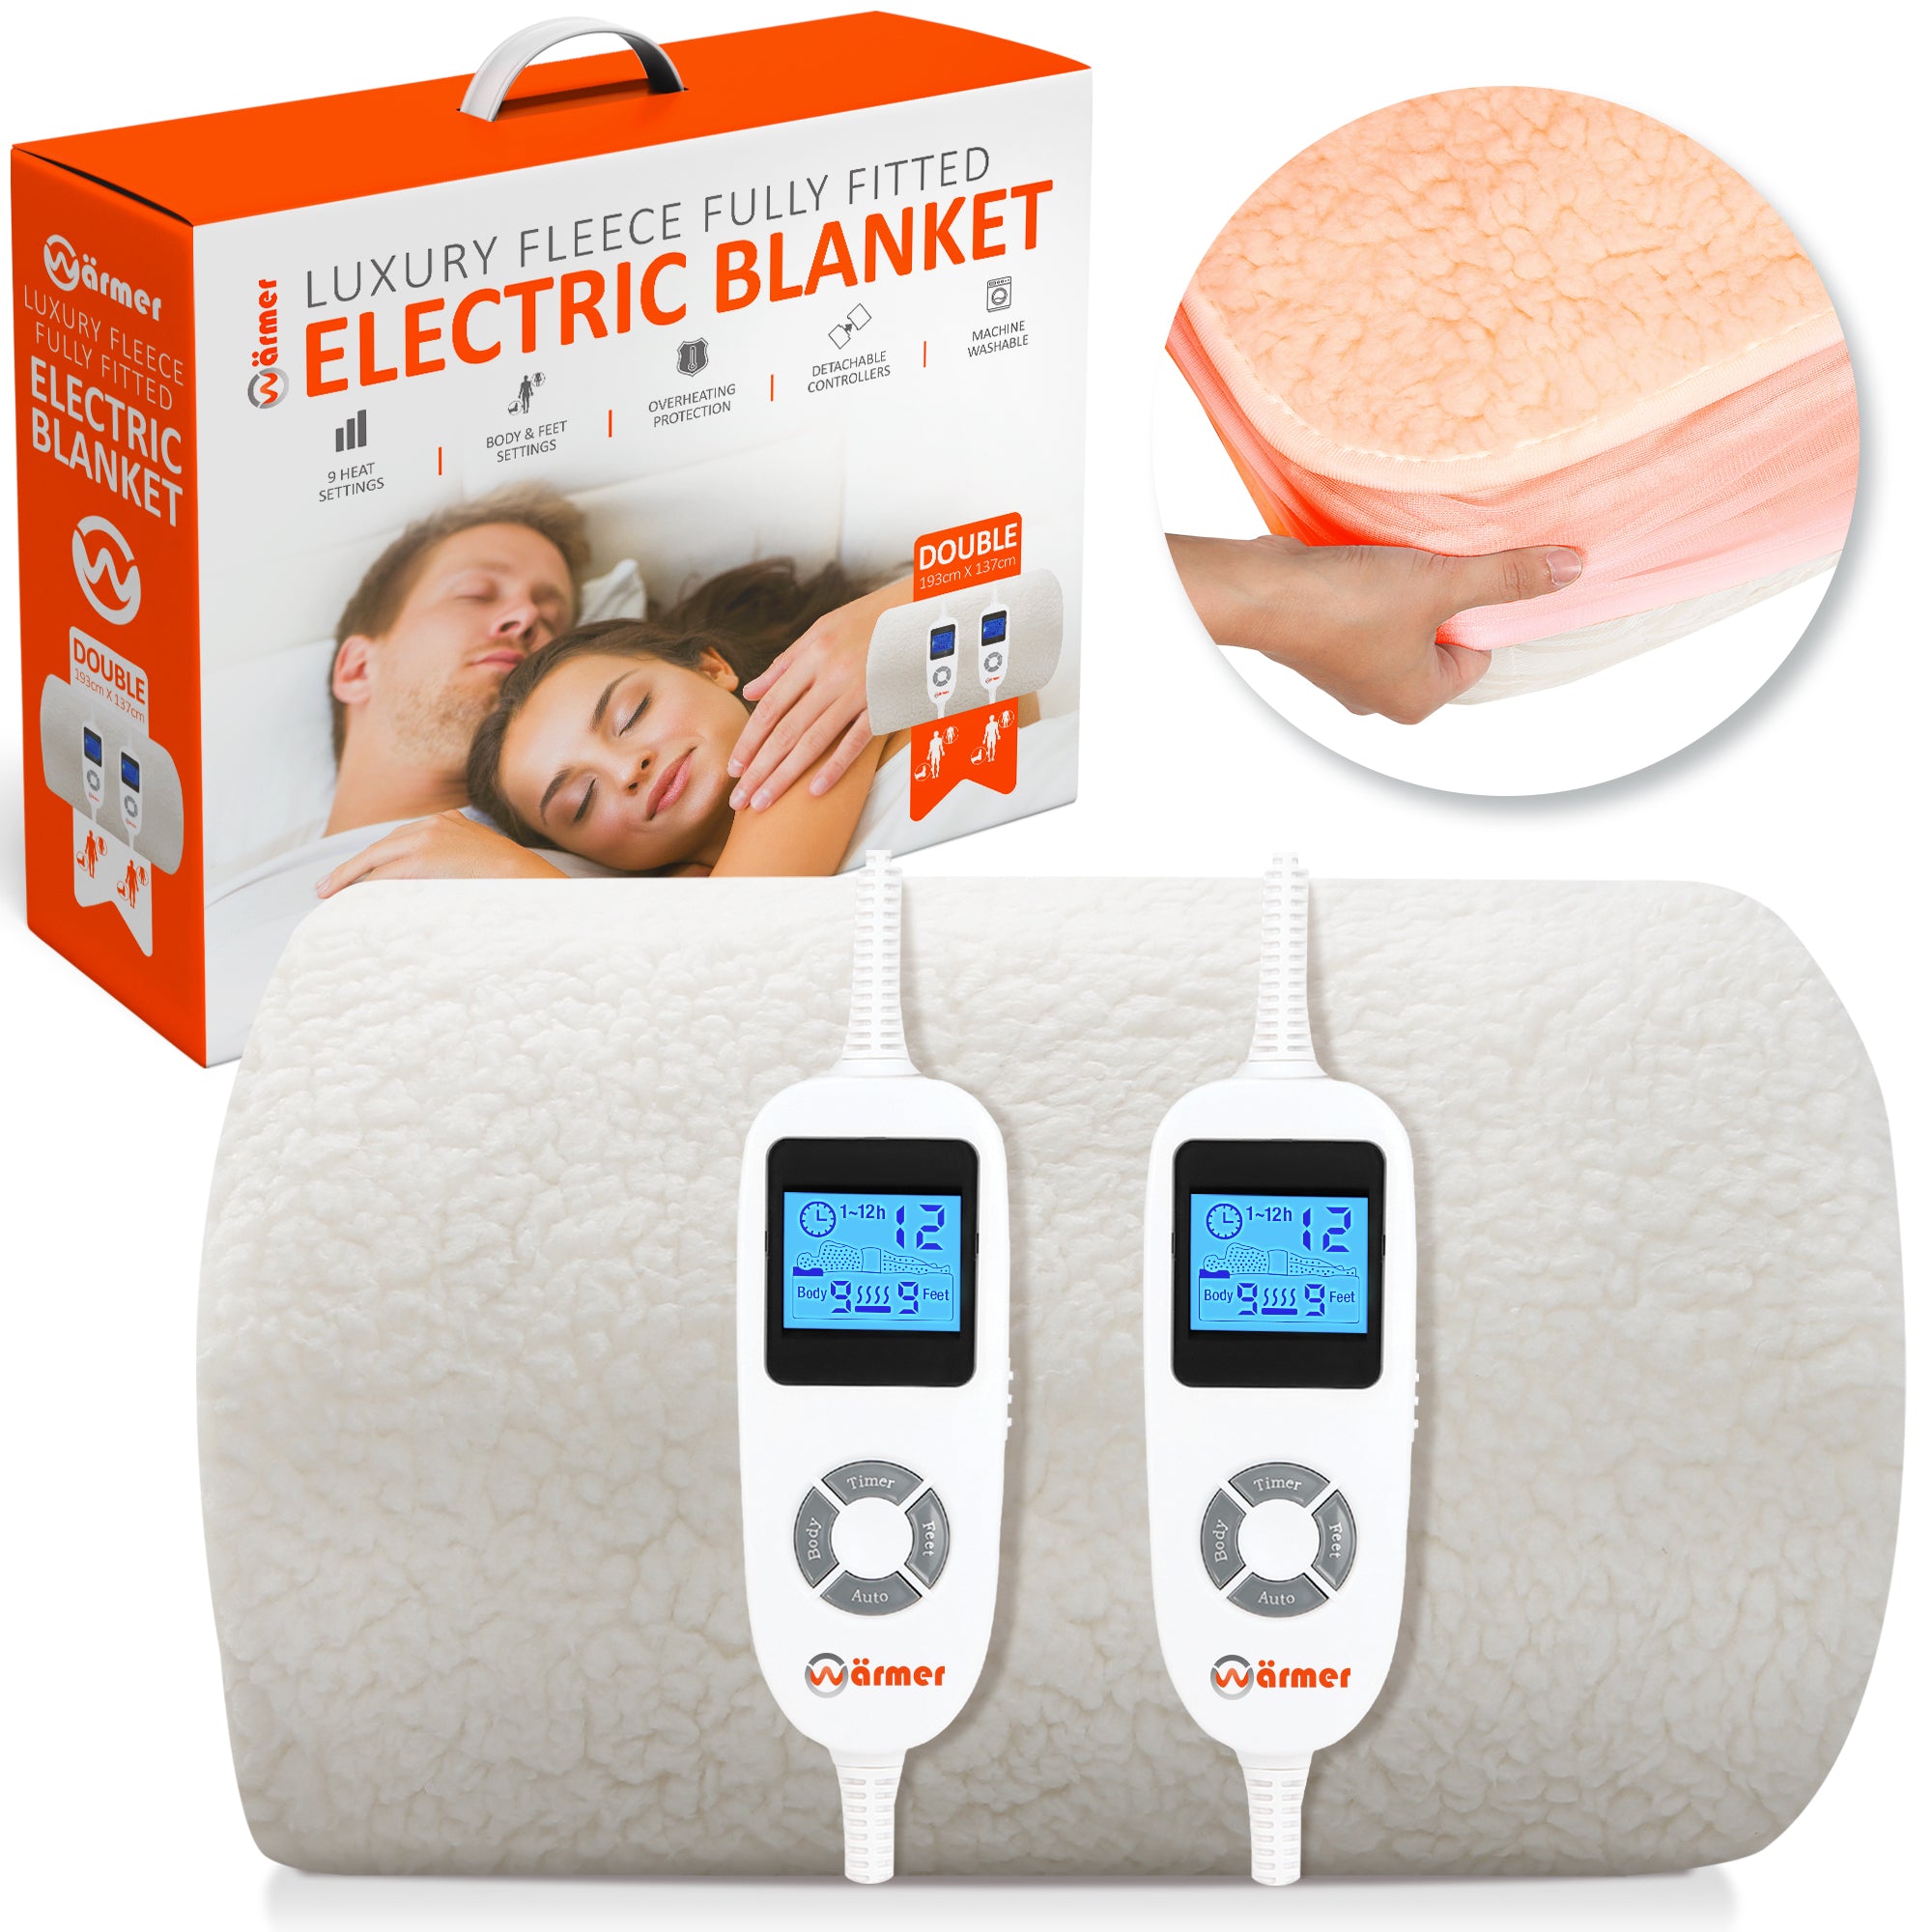 Wärmer Luxury Fleece Fully Fitted Electric Blanket with Dual Body Zone Controllers